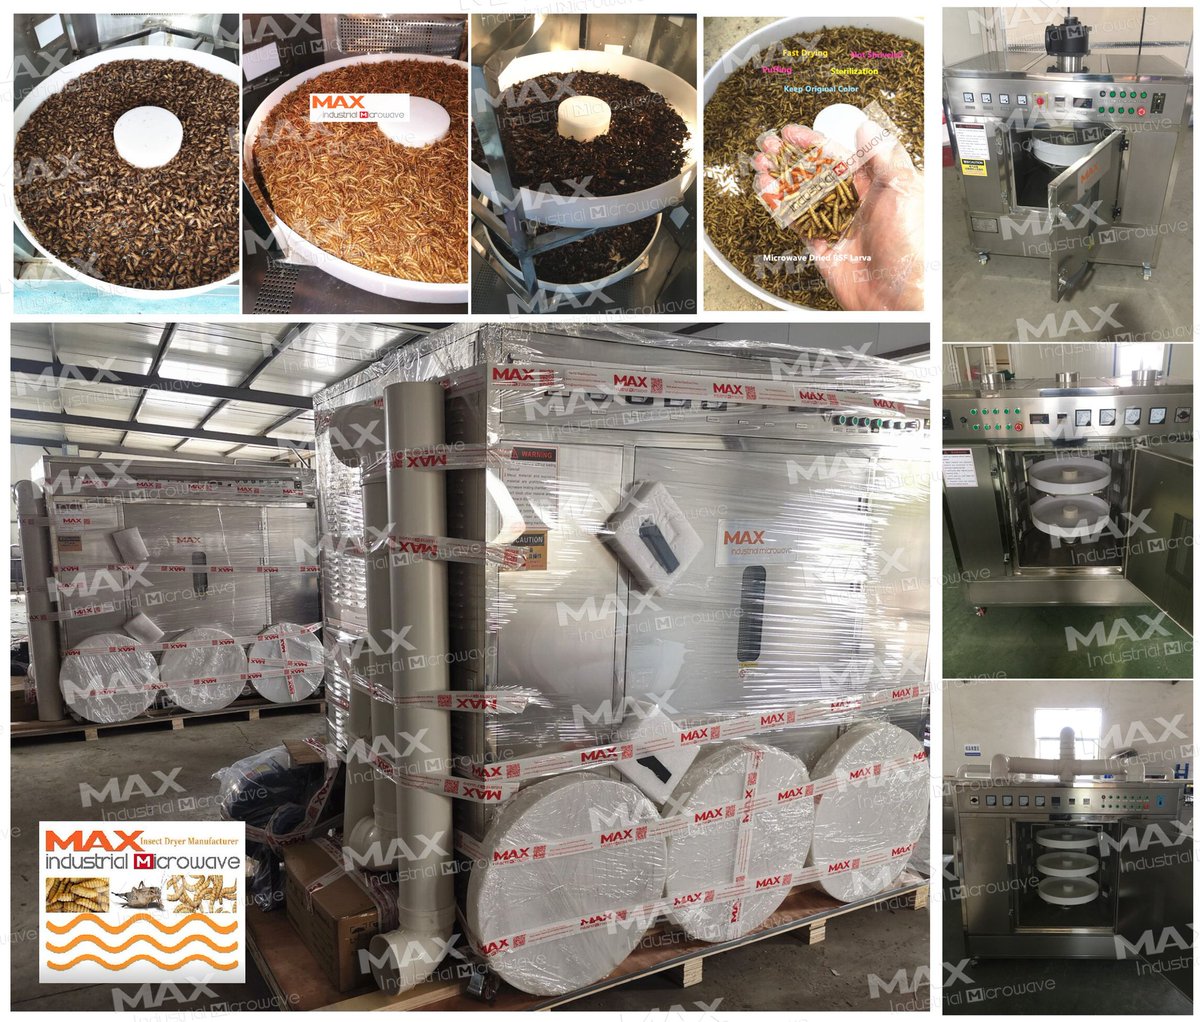 Feed/Edible Insects Microwave Drying and Sterilization Machine
maxindustrialmicrowave.com
#edibleinsects
#cricketfarm
#cricketflour
#mealworms
#superworms
#blacksoldierfly
#edibleinsect
#worms
#entomophagy
#sustainability
#insectfarm